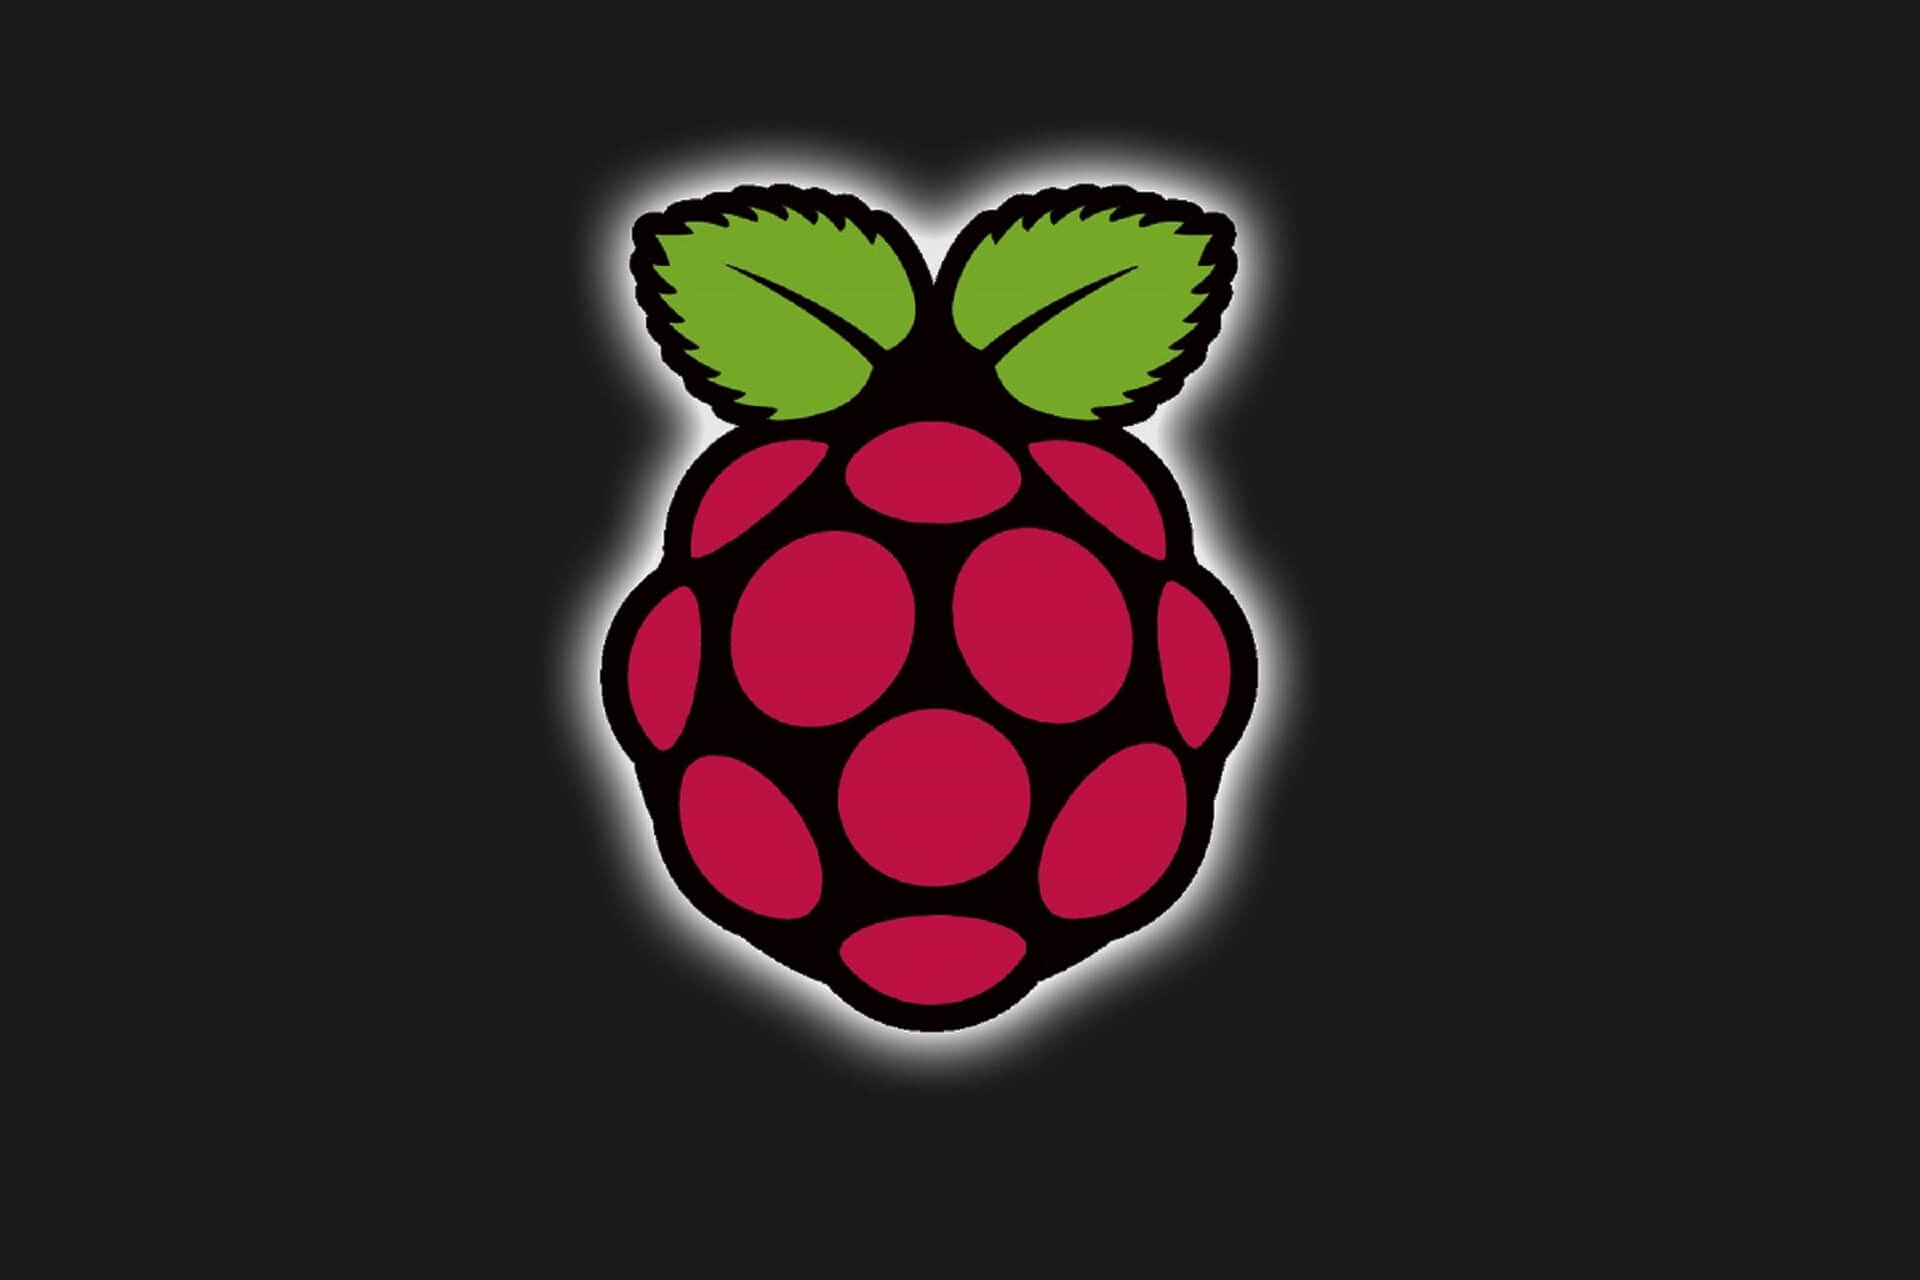 Raspberry Pi doesn’t show up